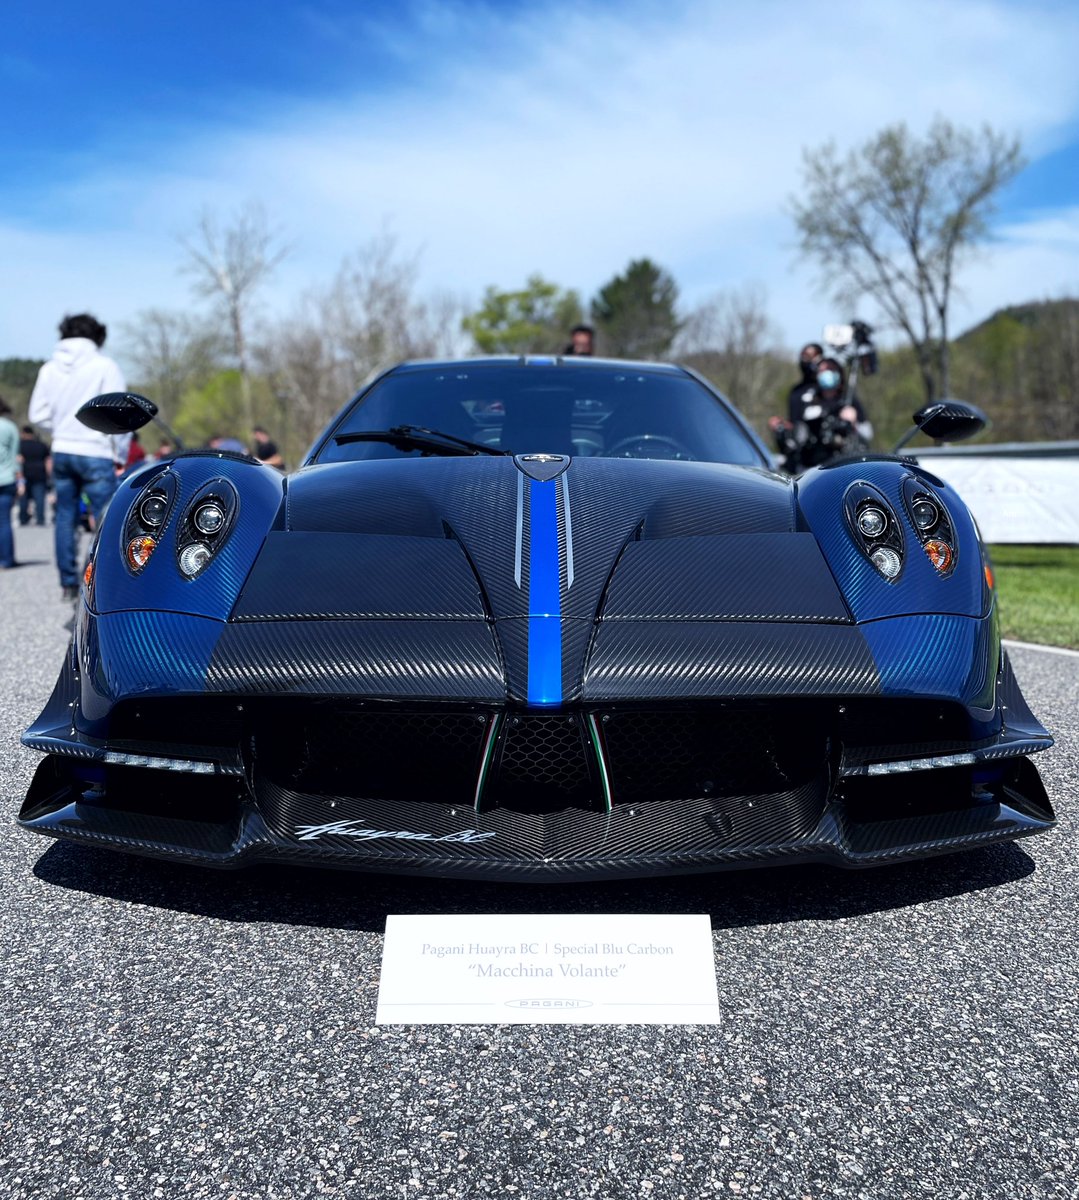 Check out our brand new post with @3FCollection’s unbelievable Pagani Huayra BC ‘Macchina Volante’! 

For the full post click here: instagram.com/p/CQMZx1apcRy/…

#AMMEDIANY #Pagani #TripleFCollection #Car #cars #carshow #paganihuayrabc #huayra #huayrabc #MVBC #MacchinaVolante